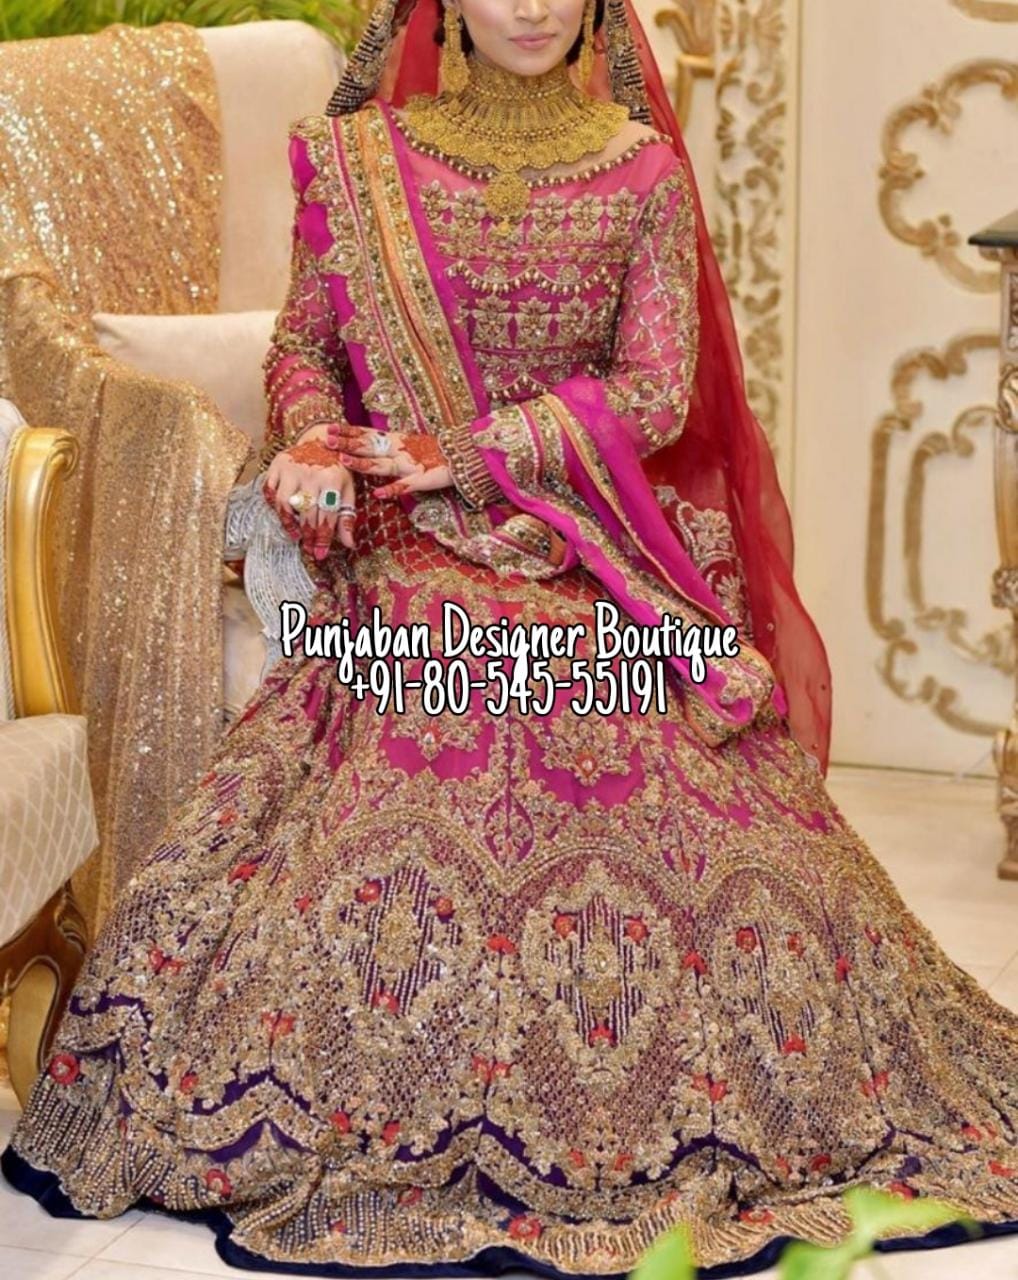 Stunning Collection of Full 4K Wedding Lehenga Images with Prices – Over 999+ Options